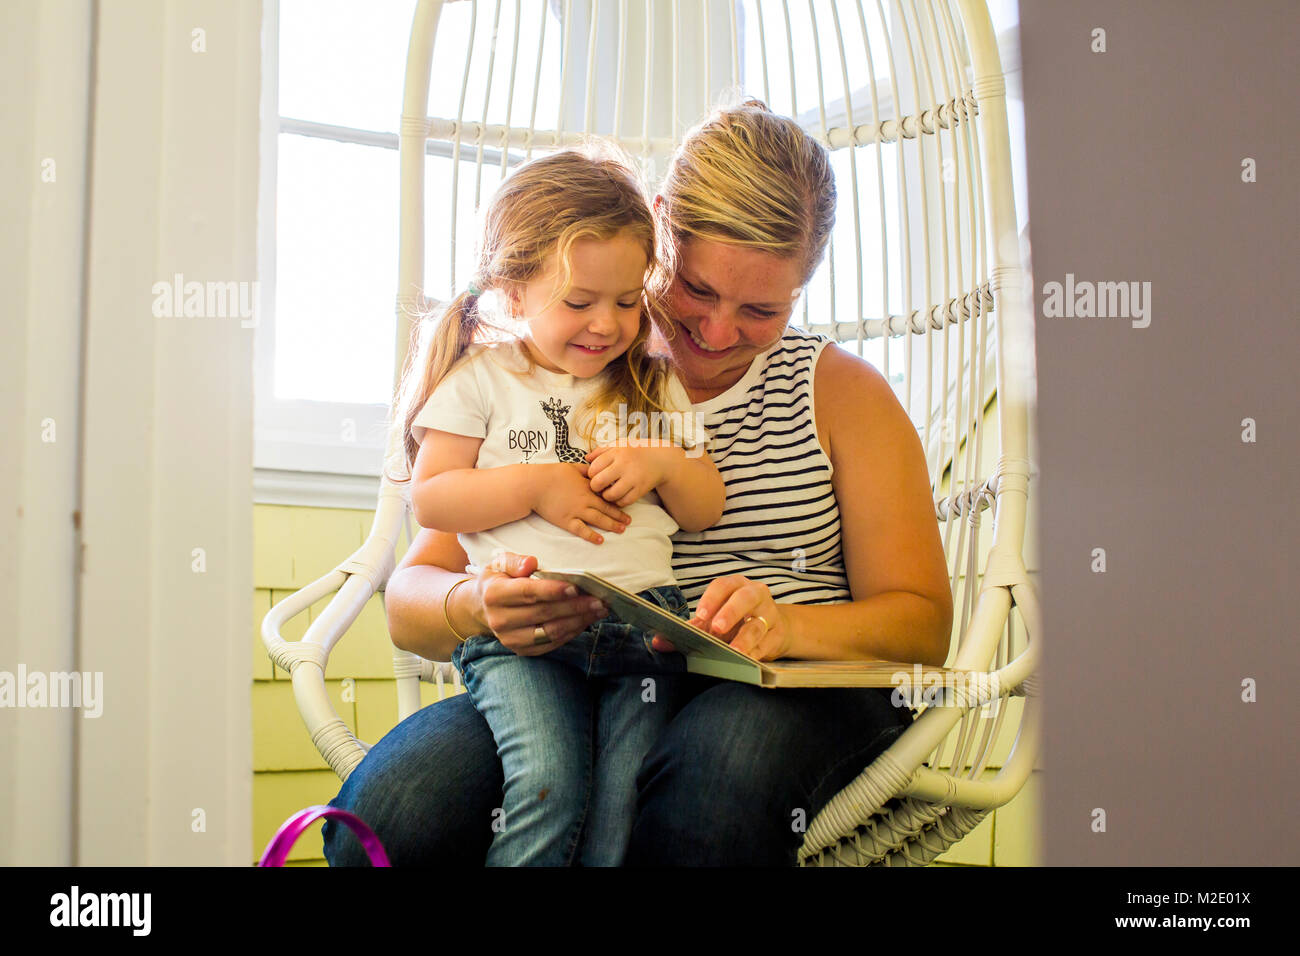 Caucasian mother reading book to daughter on lap Stock Photo